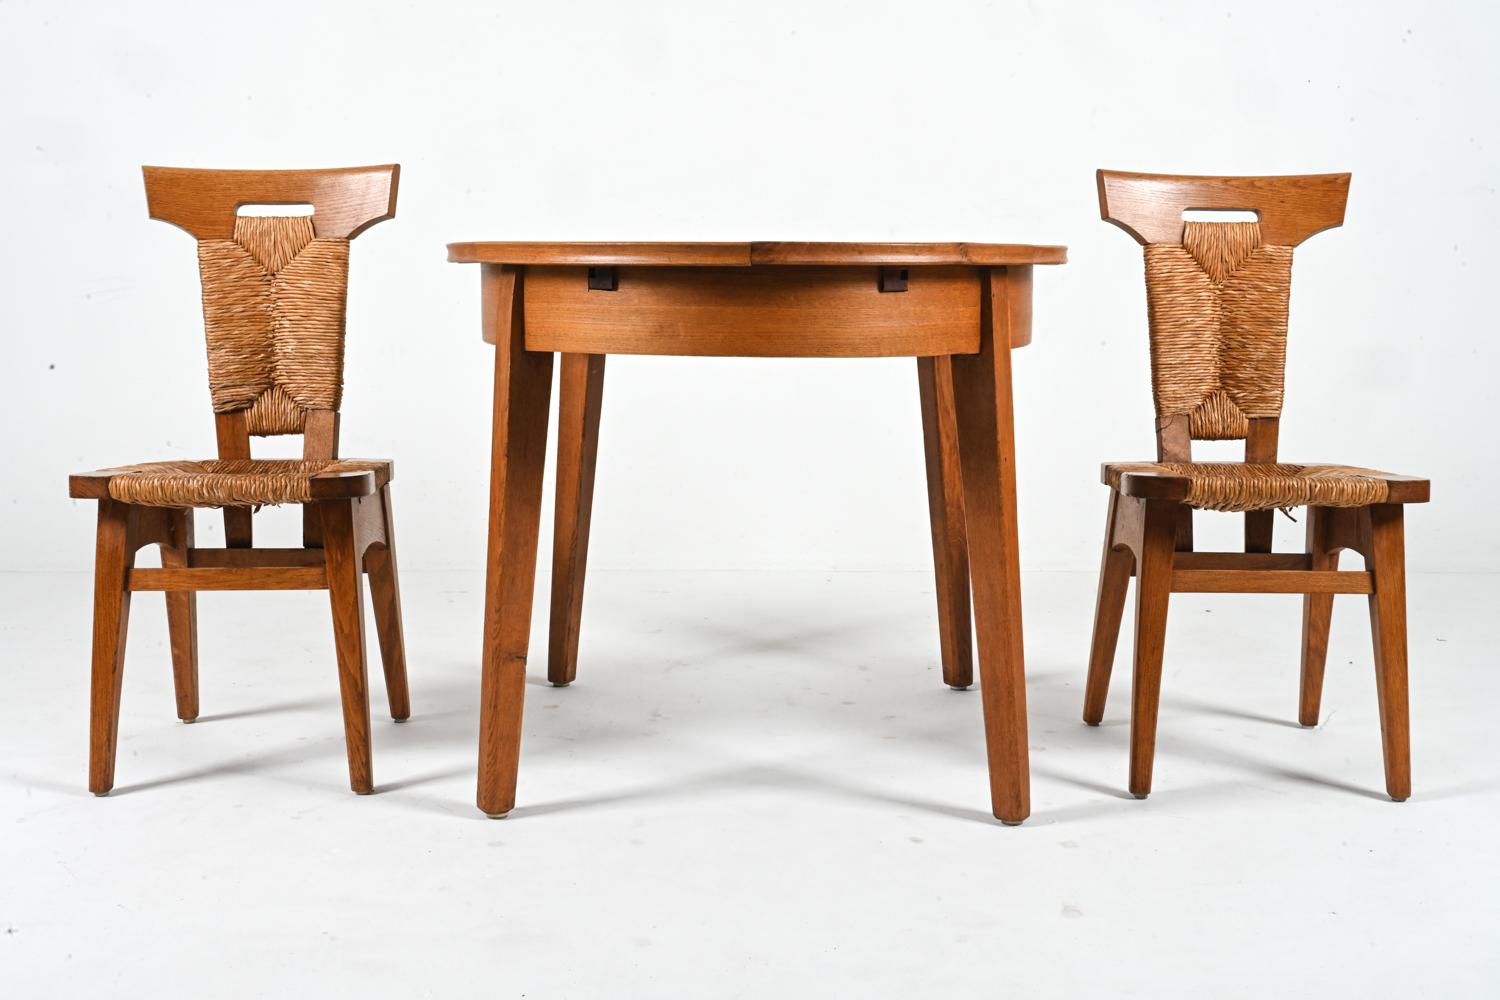 W. Kuyper Dutch Arts & Crafts Dining Suite in Oak & Rush, c. 1920s For Sale 6